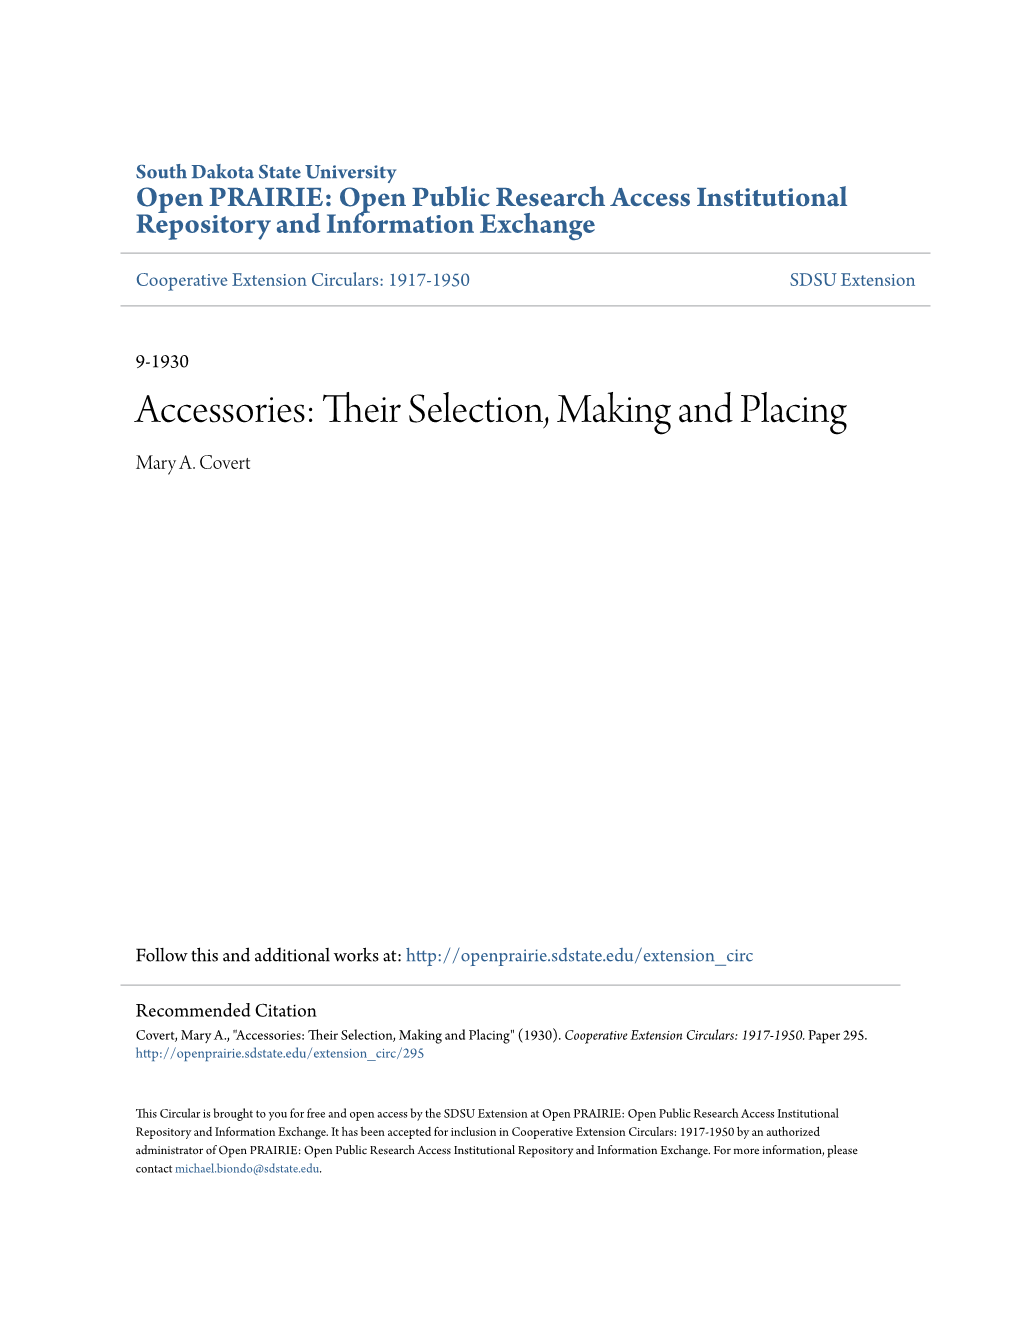 Accessories: Their Selection, Making and Placing